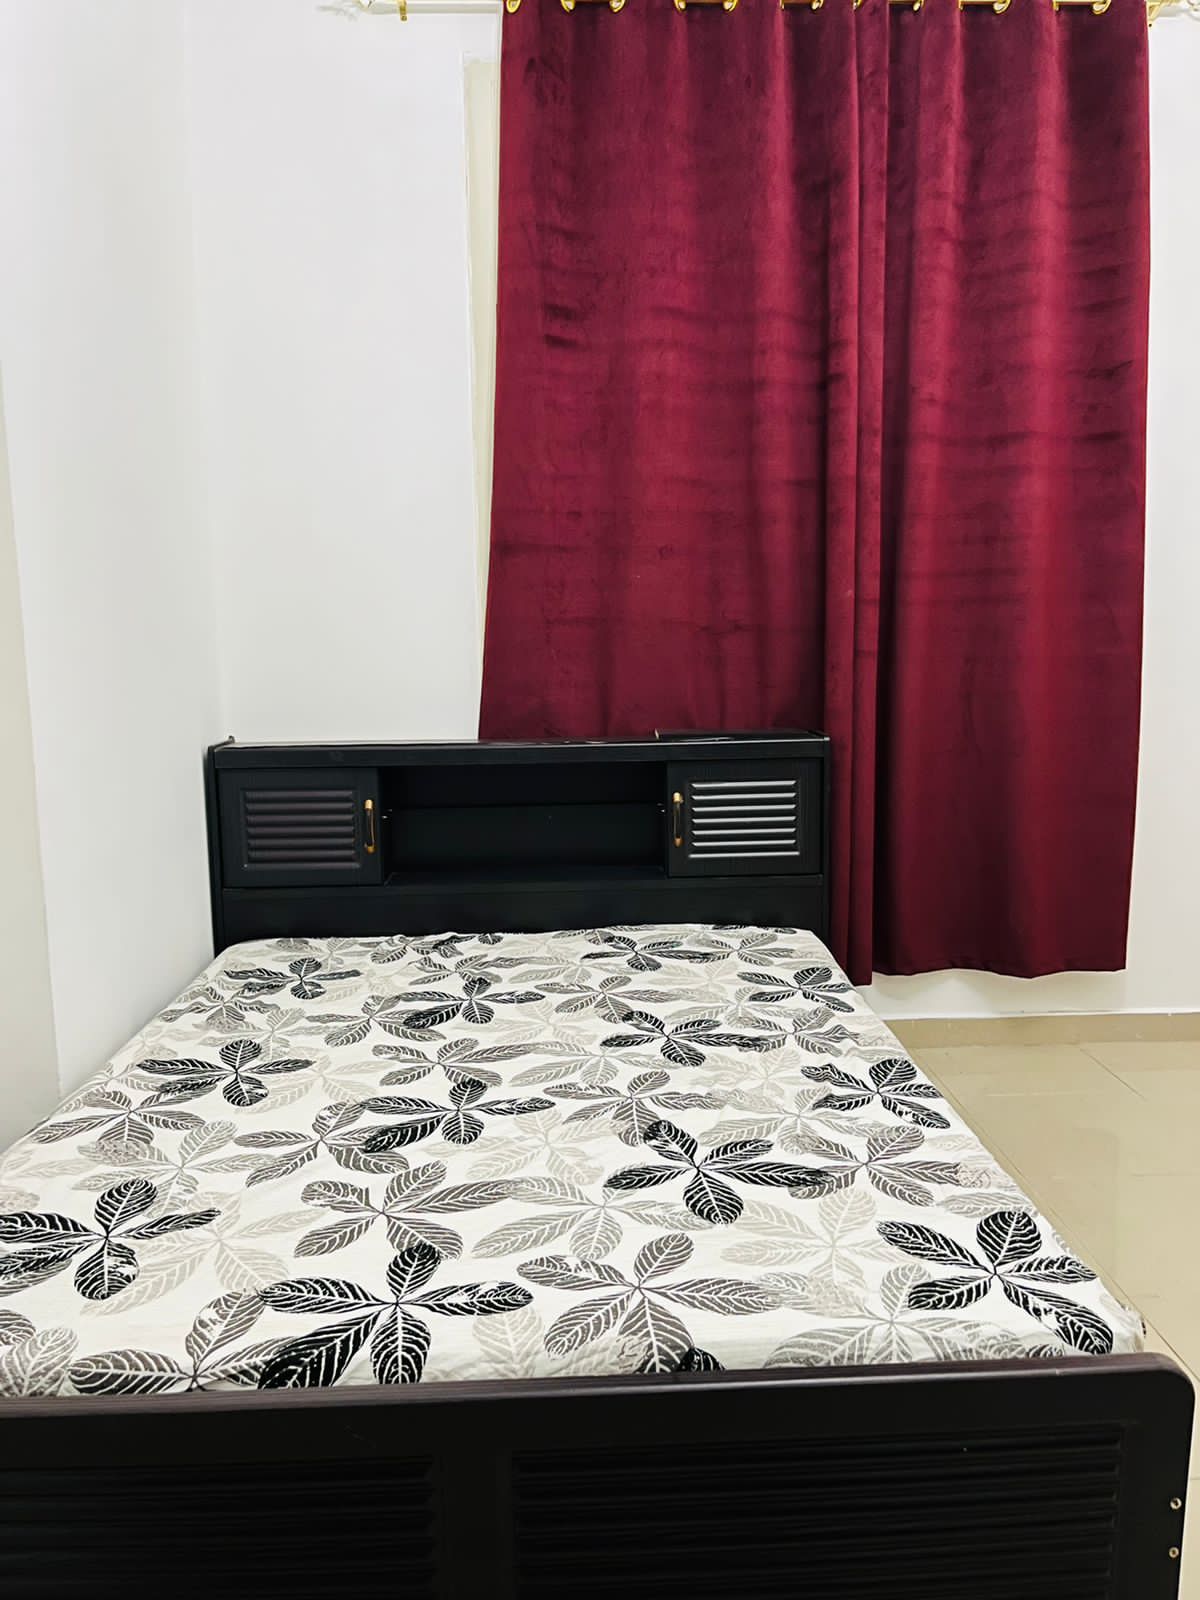 Monthly 0 for rent in Mushairef,   Dubai 